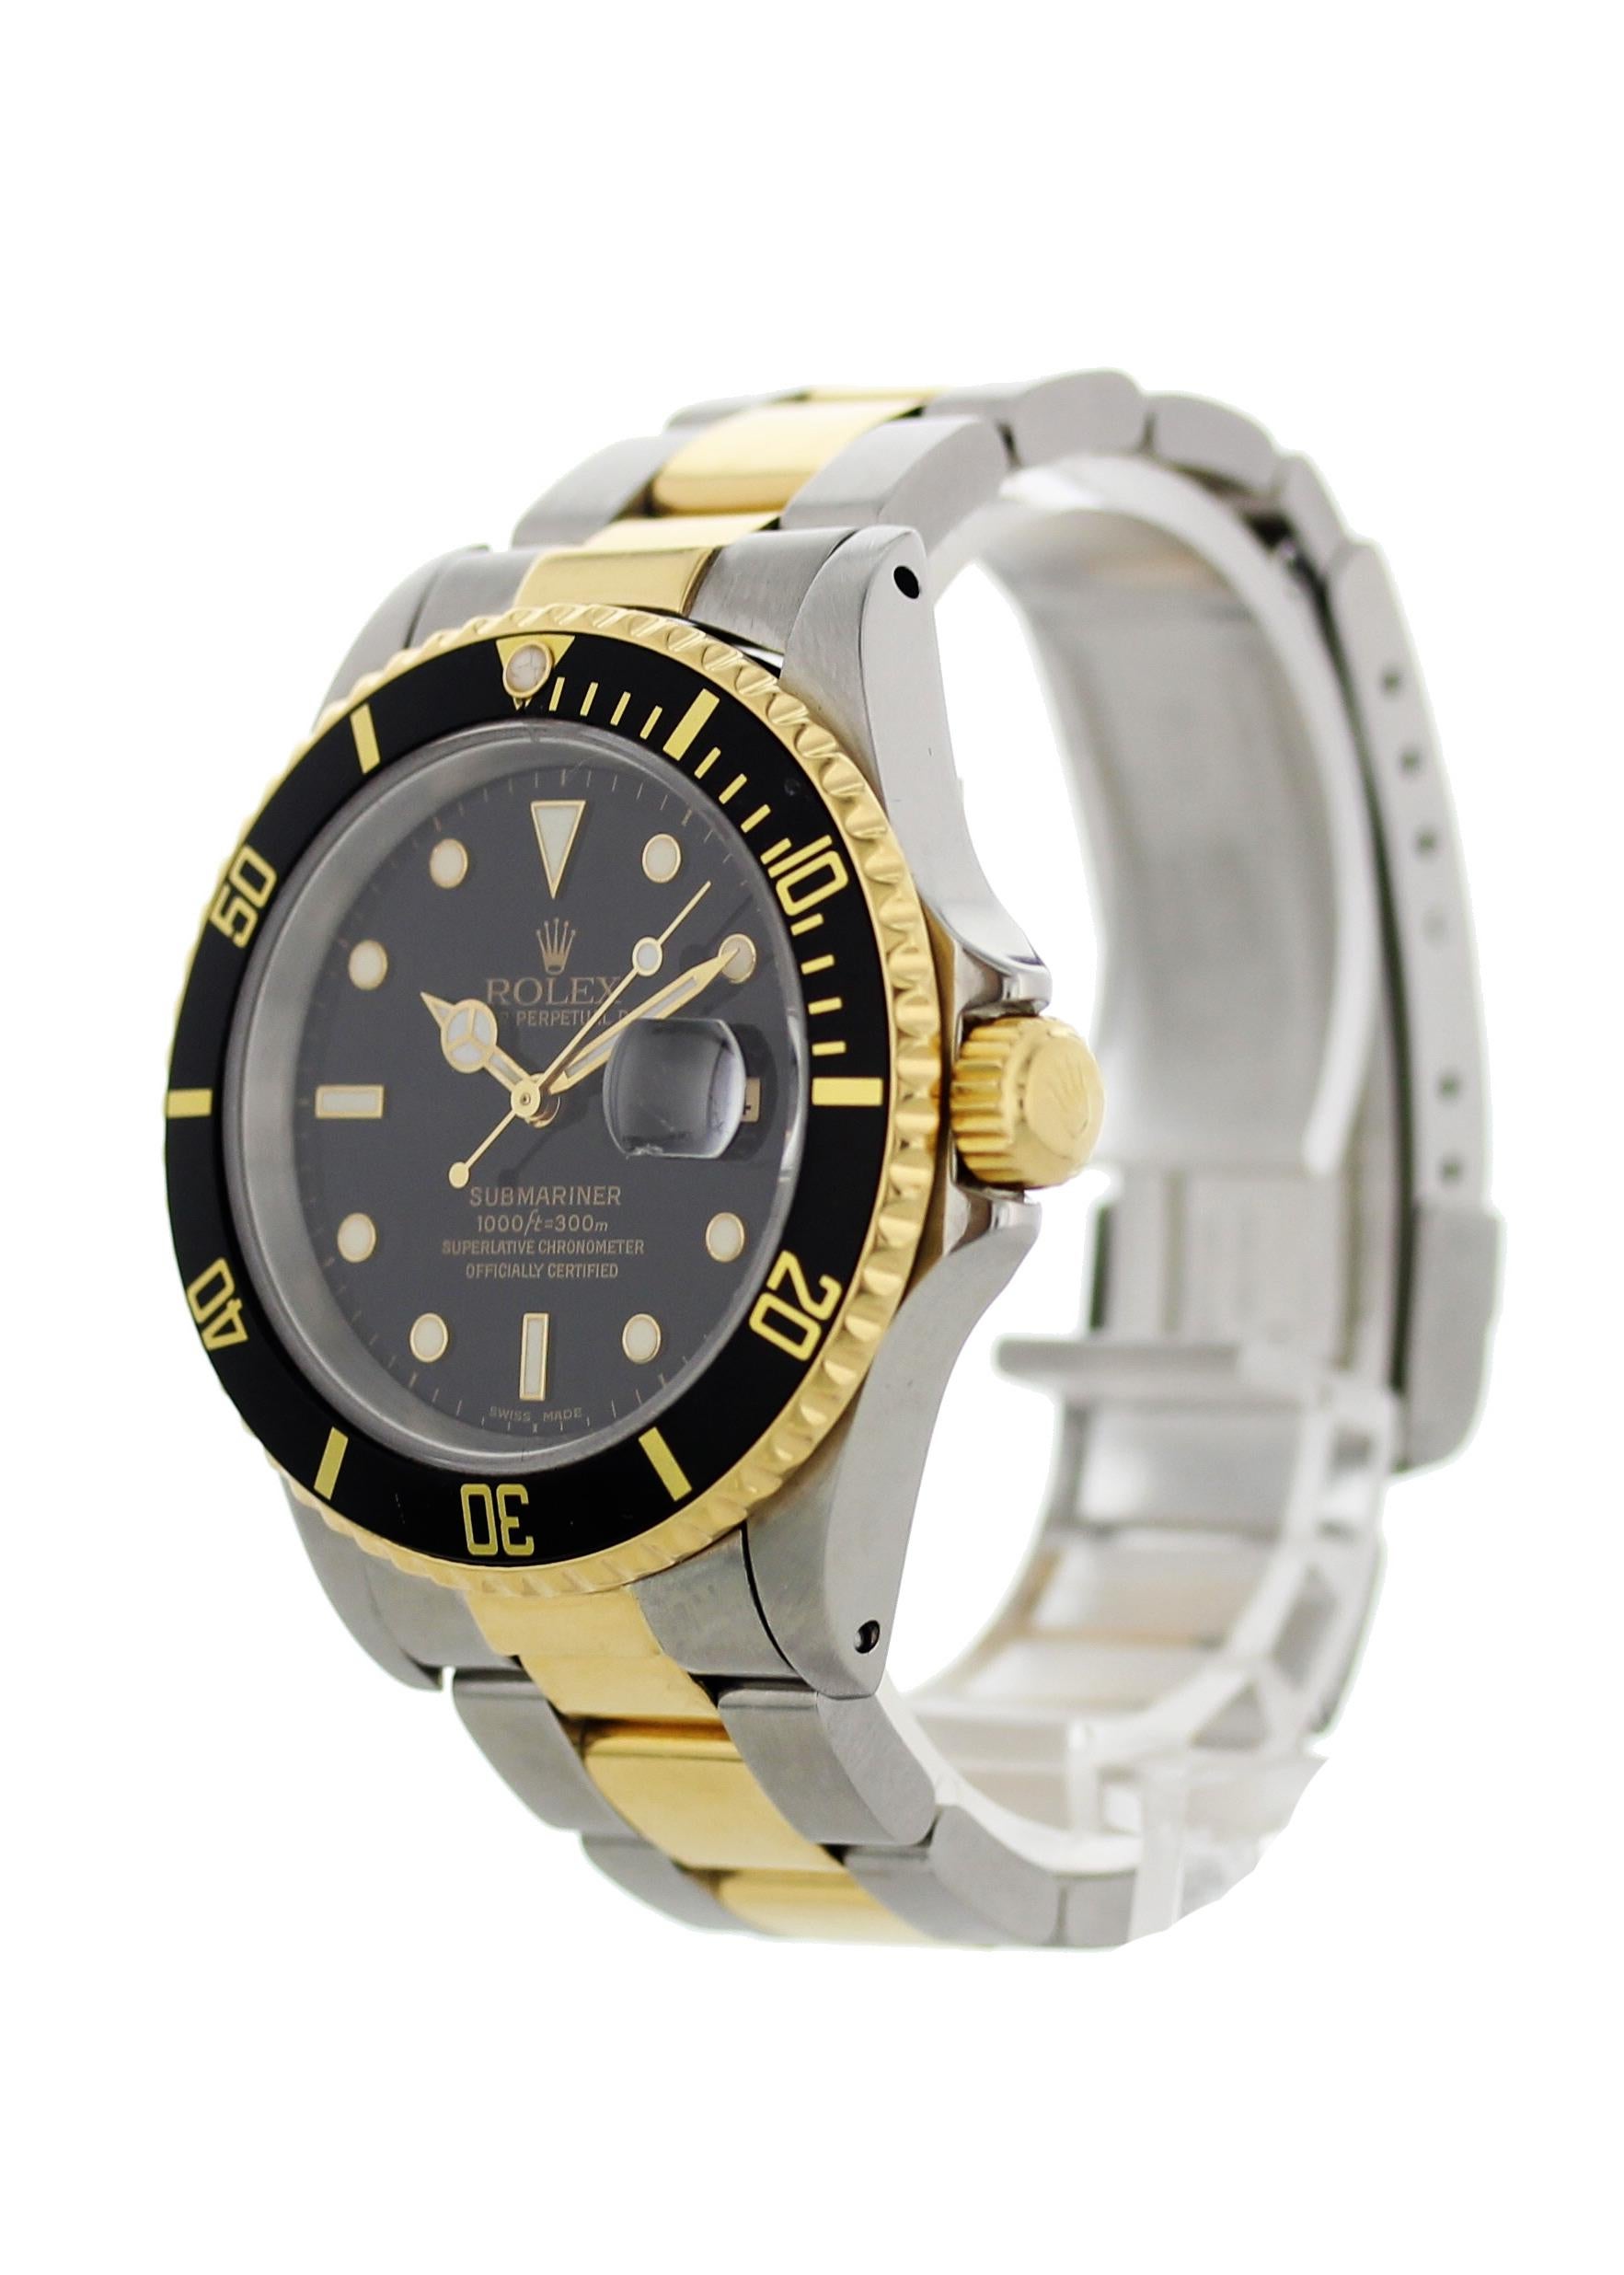 Rolex oyster perpetual Submariner Date 18k 16613 Mens Watch. 40mm Stainless steel case.18k yellow gold bezel with black bezel insert. Black dial with gold luminous hands and markers. 18k yellow gold and stainless steel Oyster band. Stainless steel